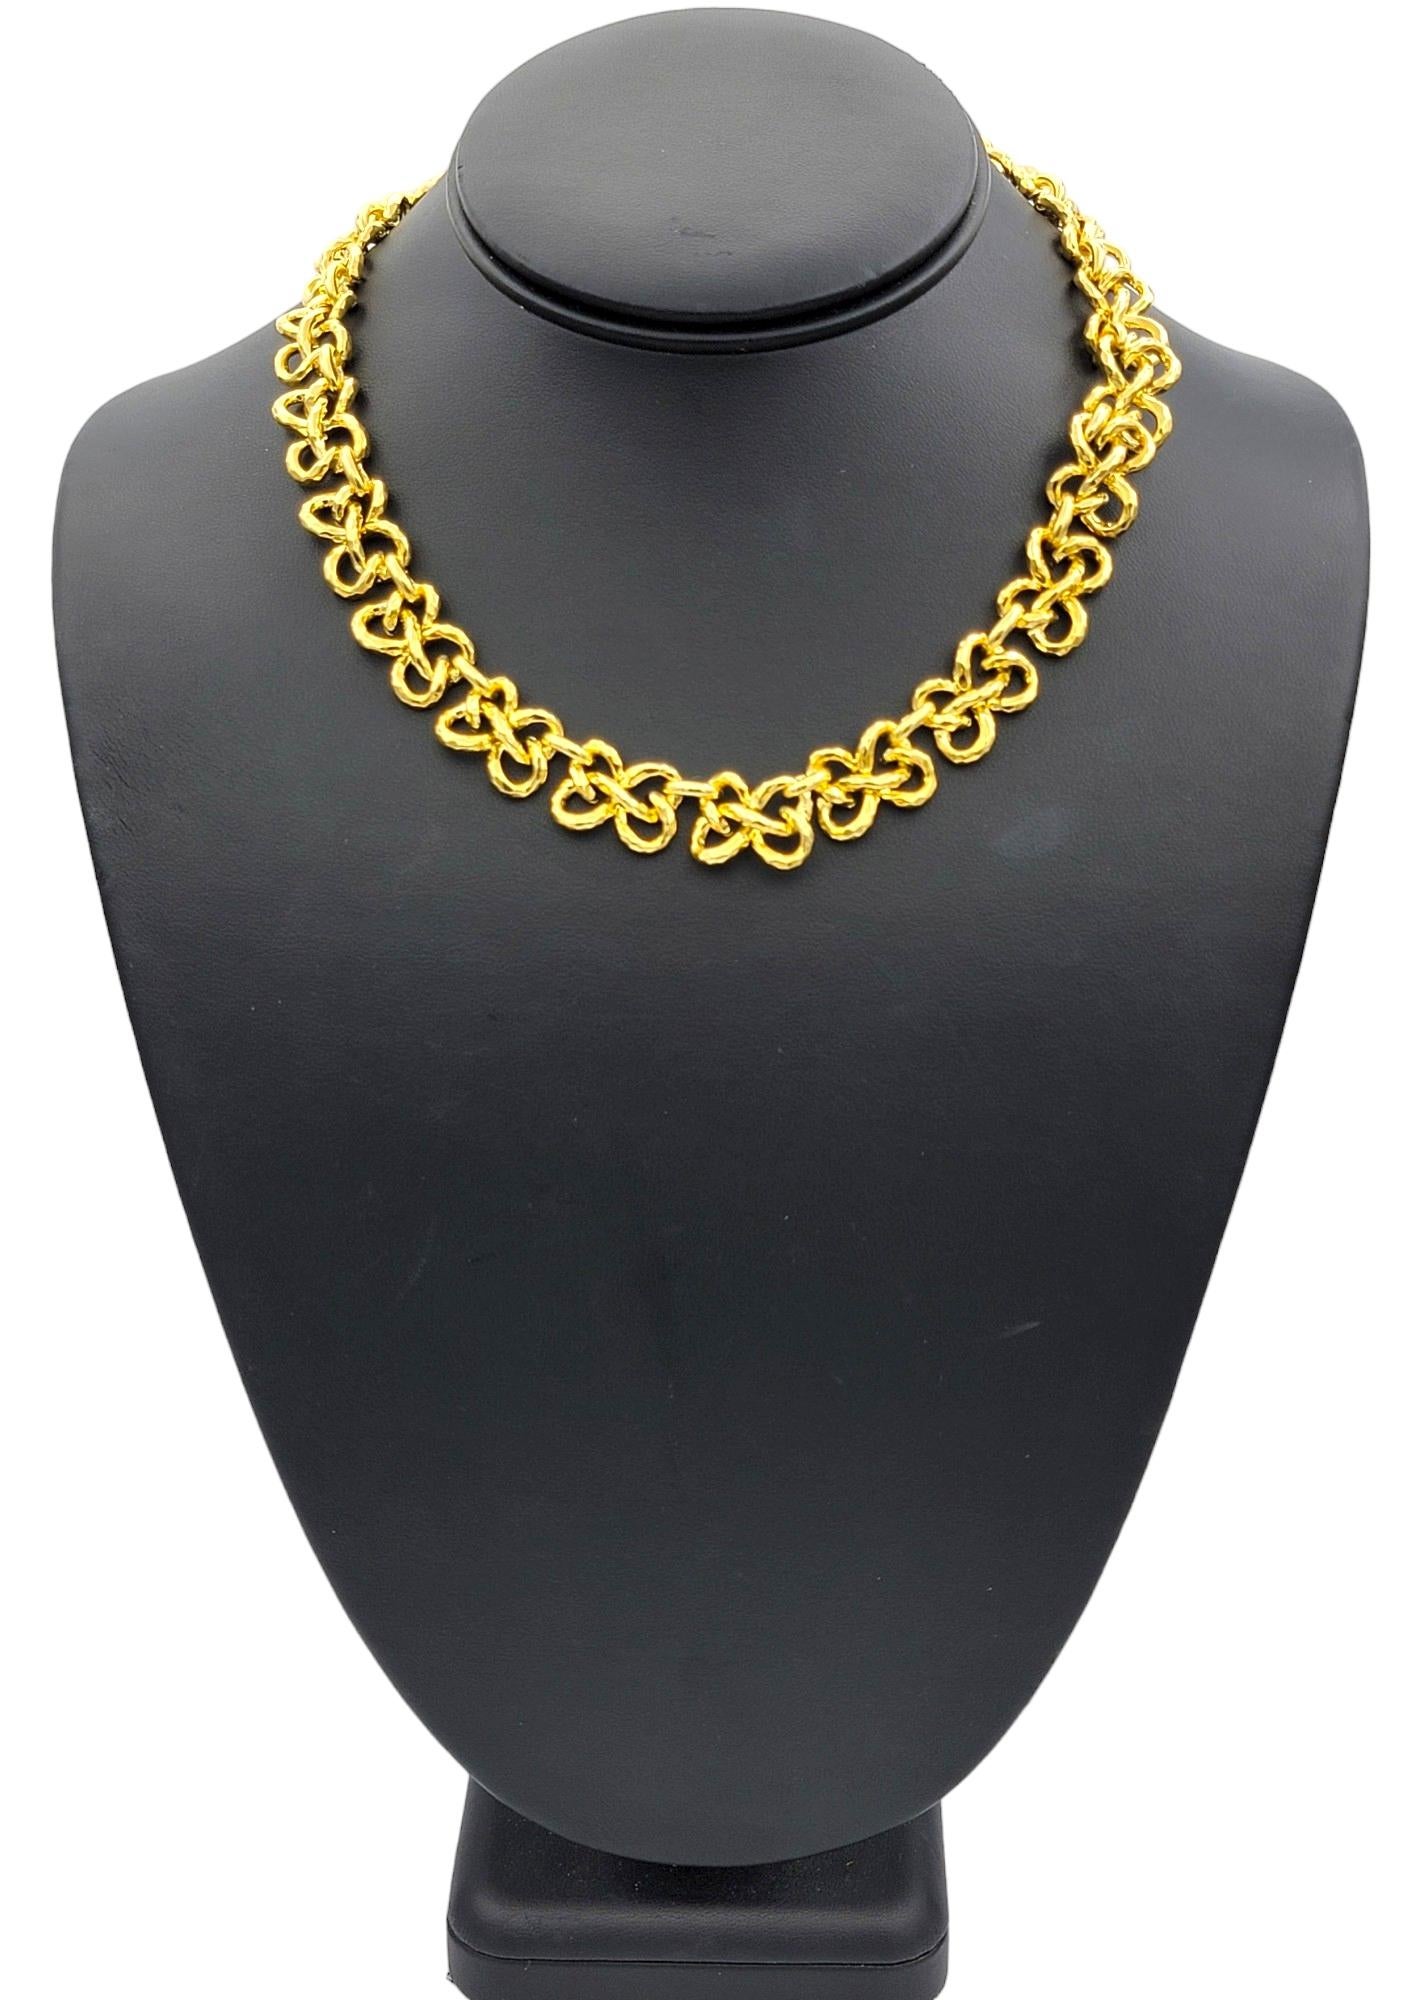 Henry Dunay Twisted Ribbon Link Collar Necklace Set in 18 Karat Yellow Gold For Sale 3